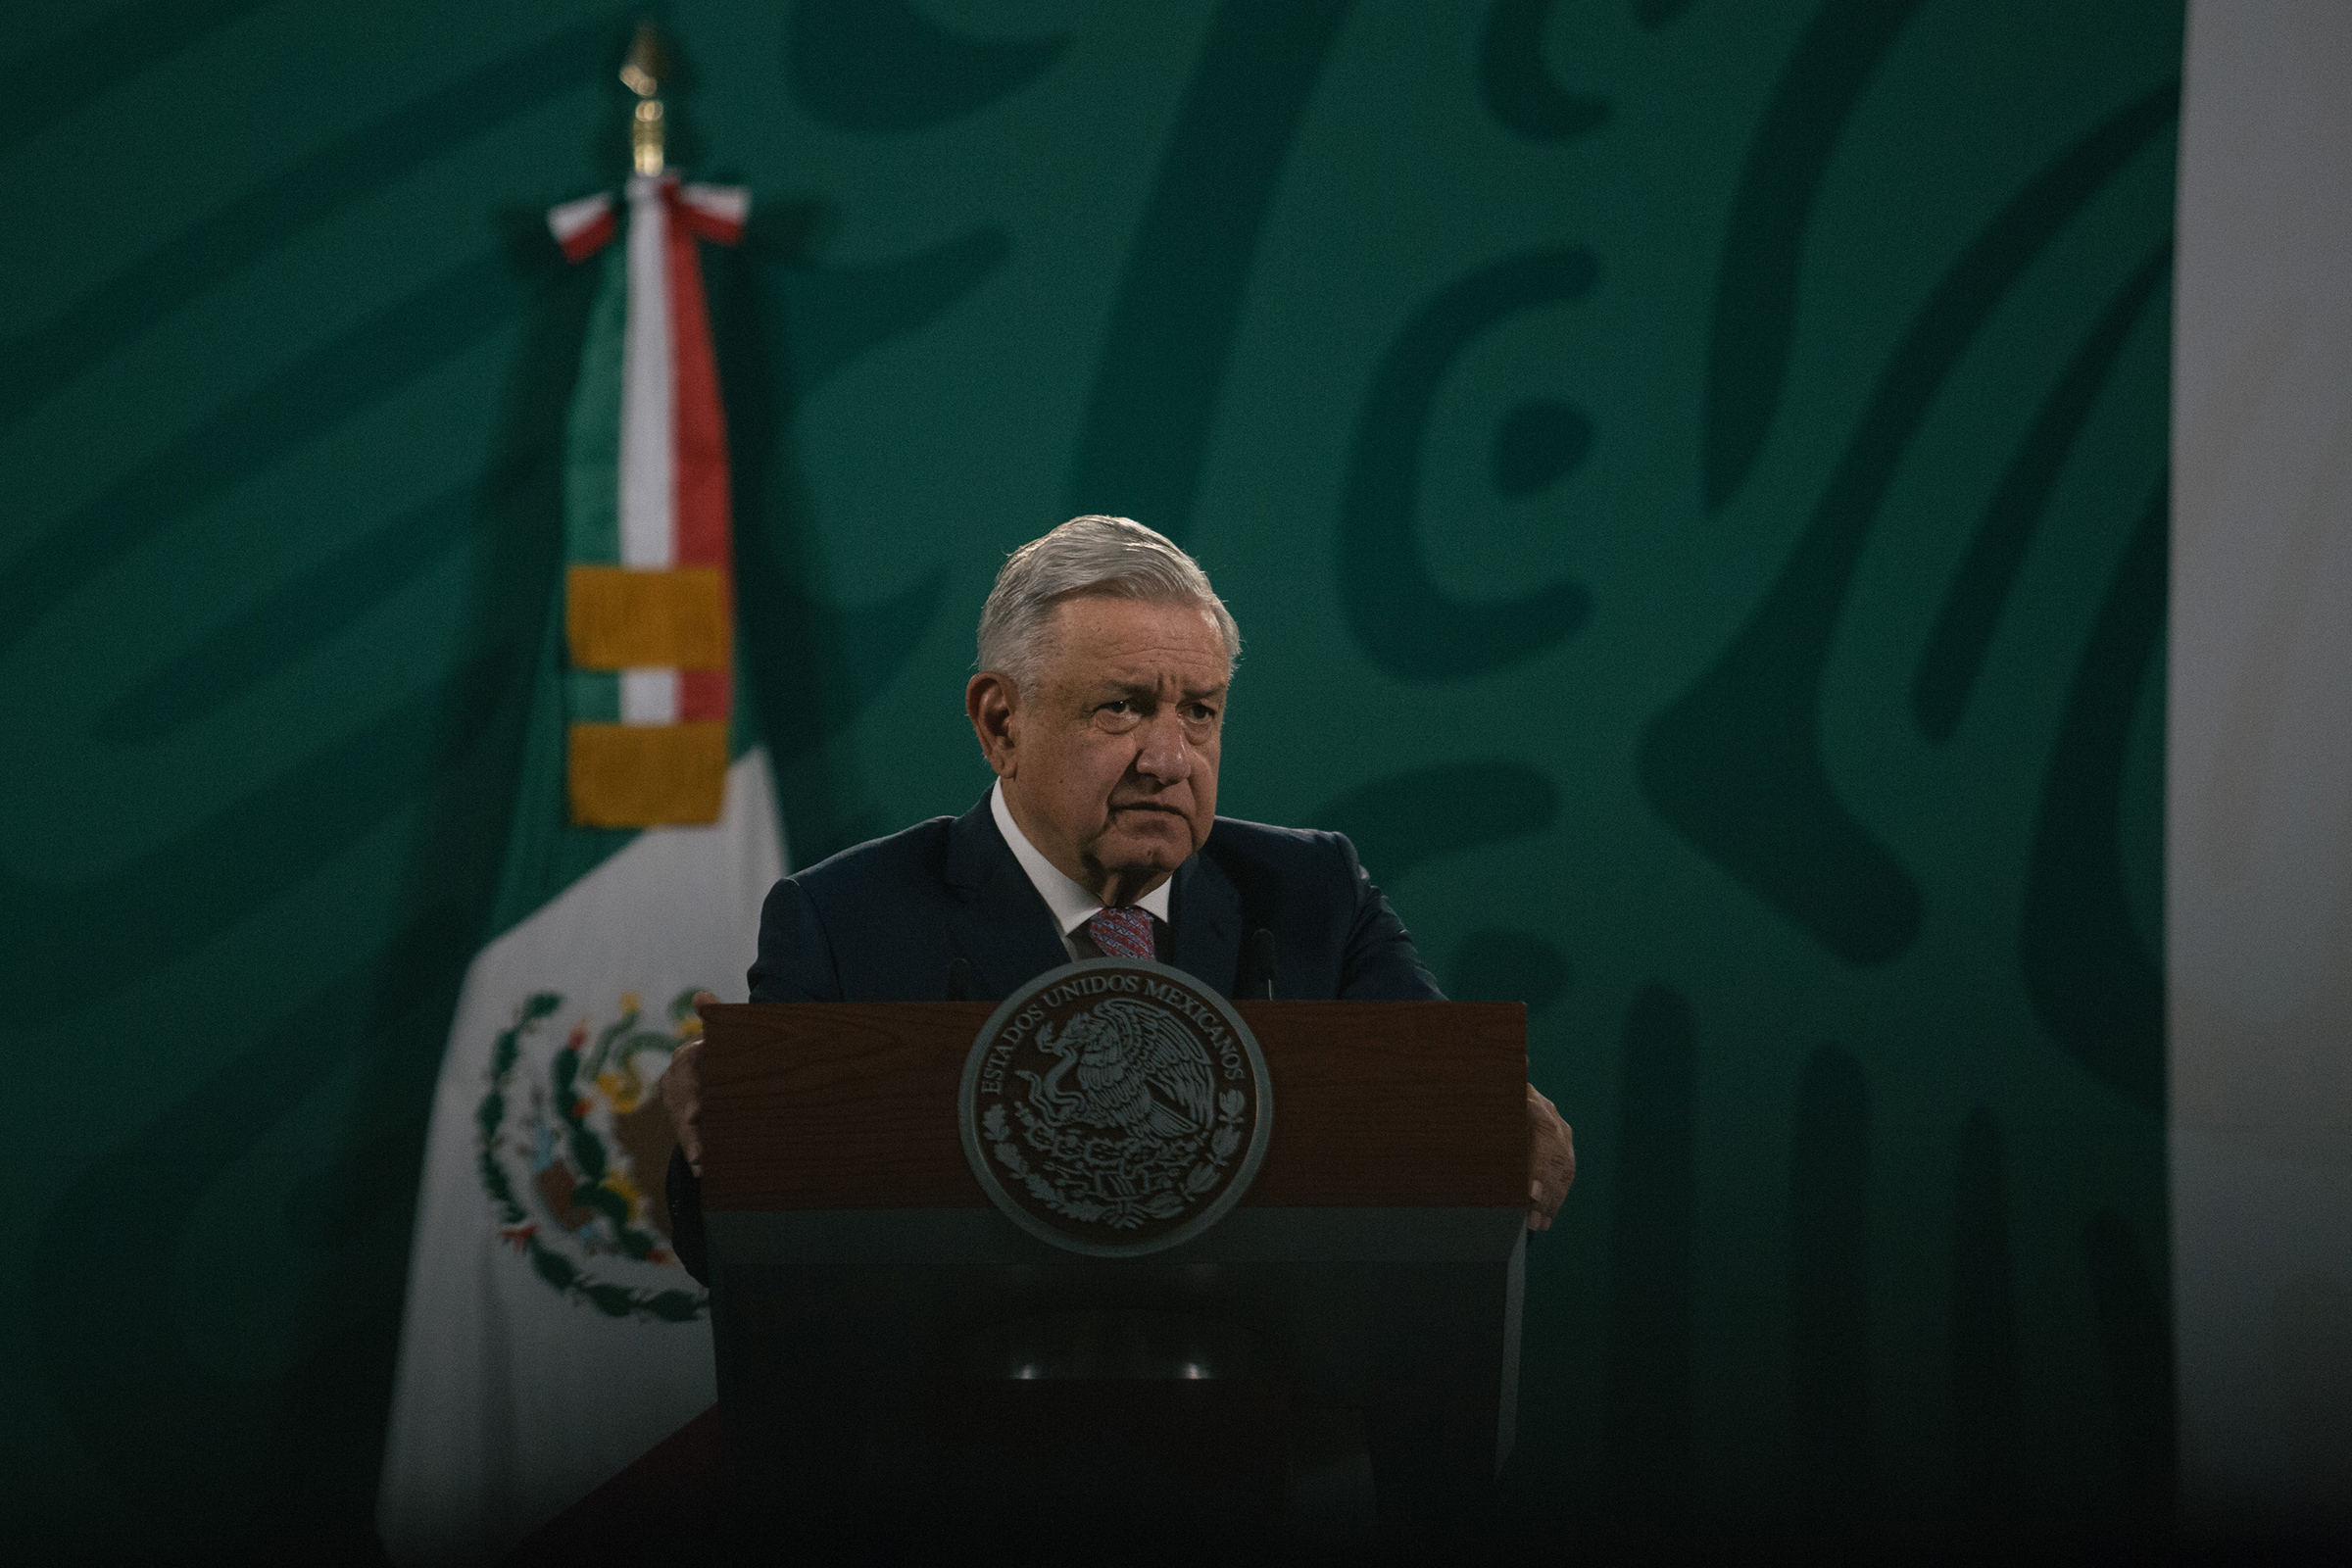 President Andrés Manuel López Obrador speaks during a news conference in Mexico City on Feb. 8. This was his first briefing after announcing he had Covid-19 and began a quarantine. (Luis Antonio Rojas—Bloomberg/Getty Images)